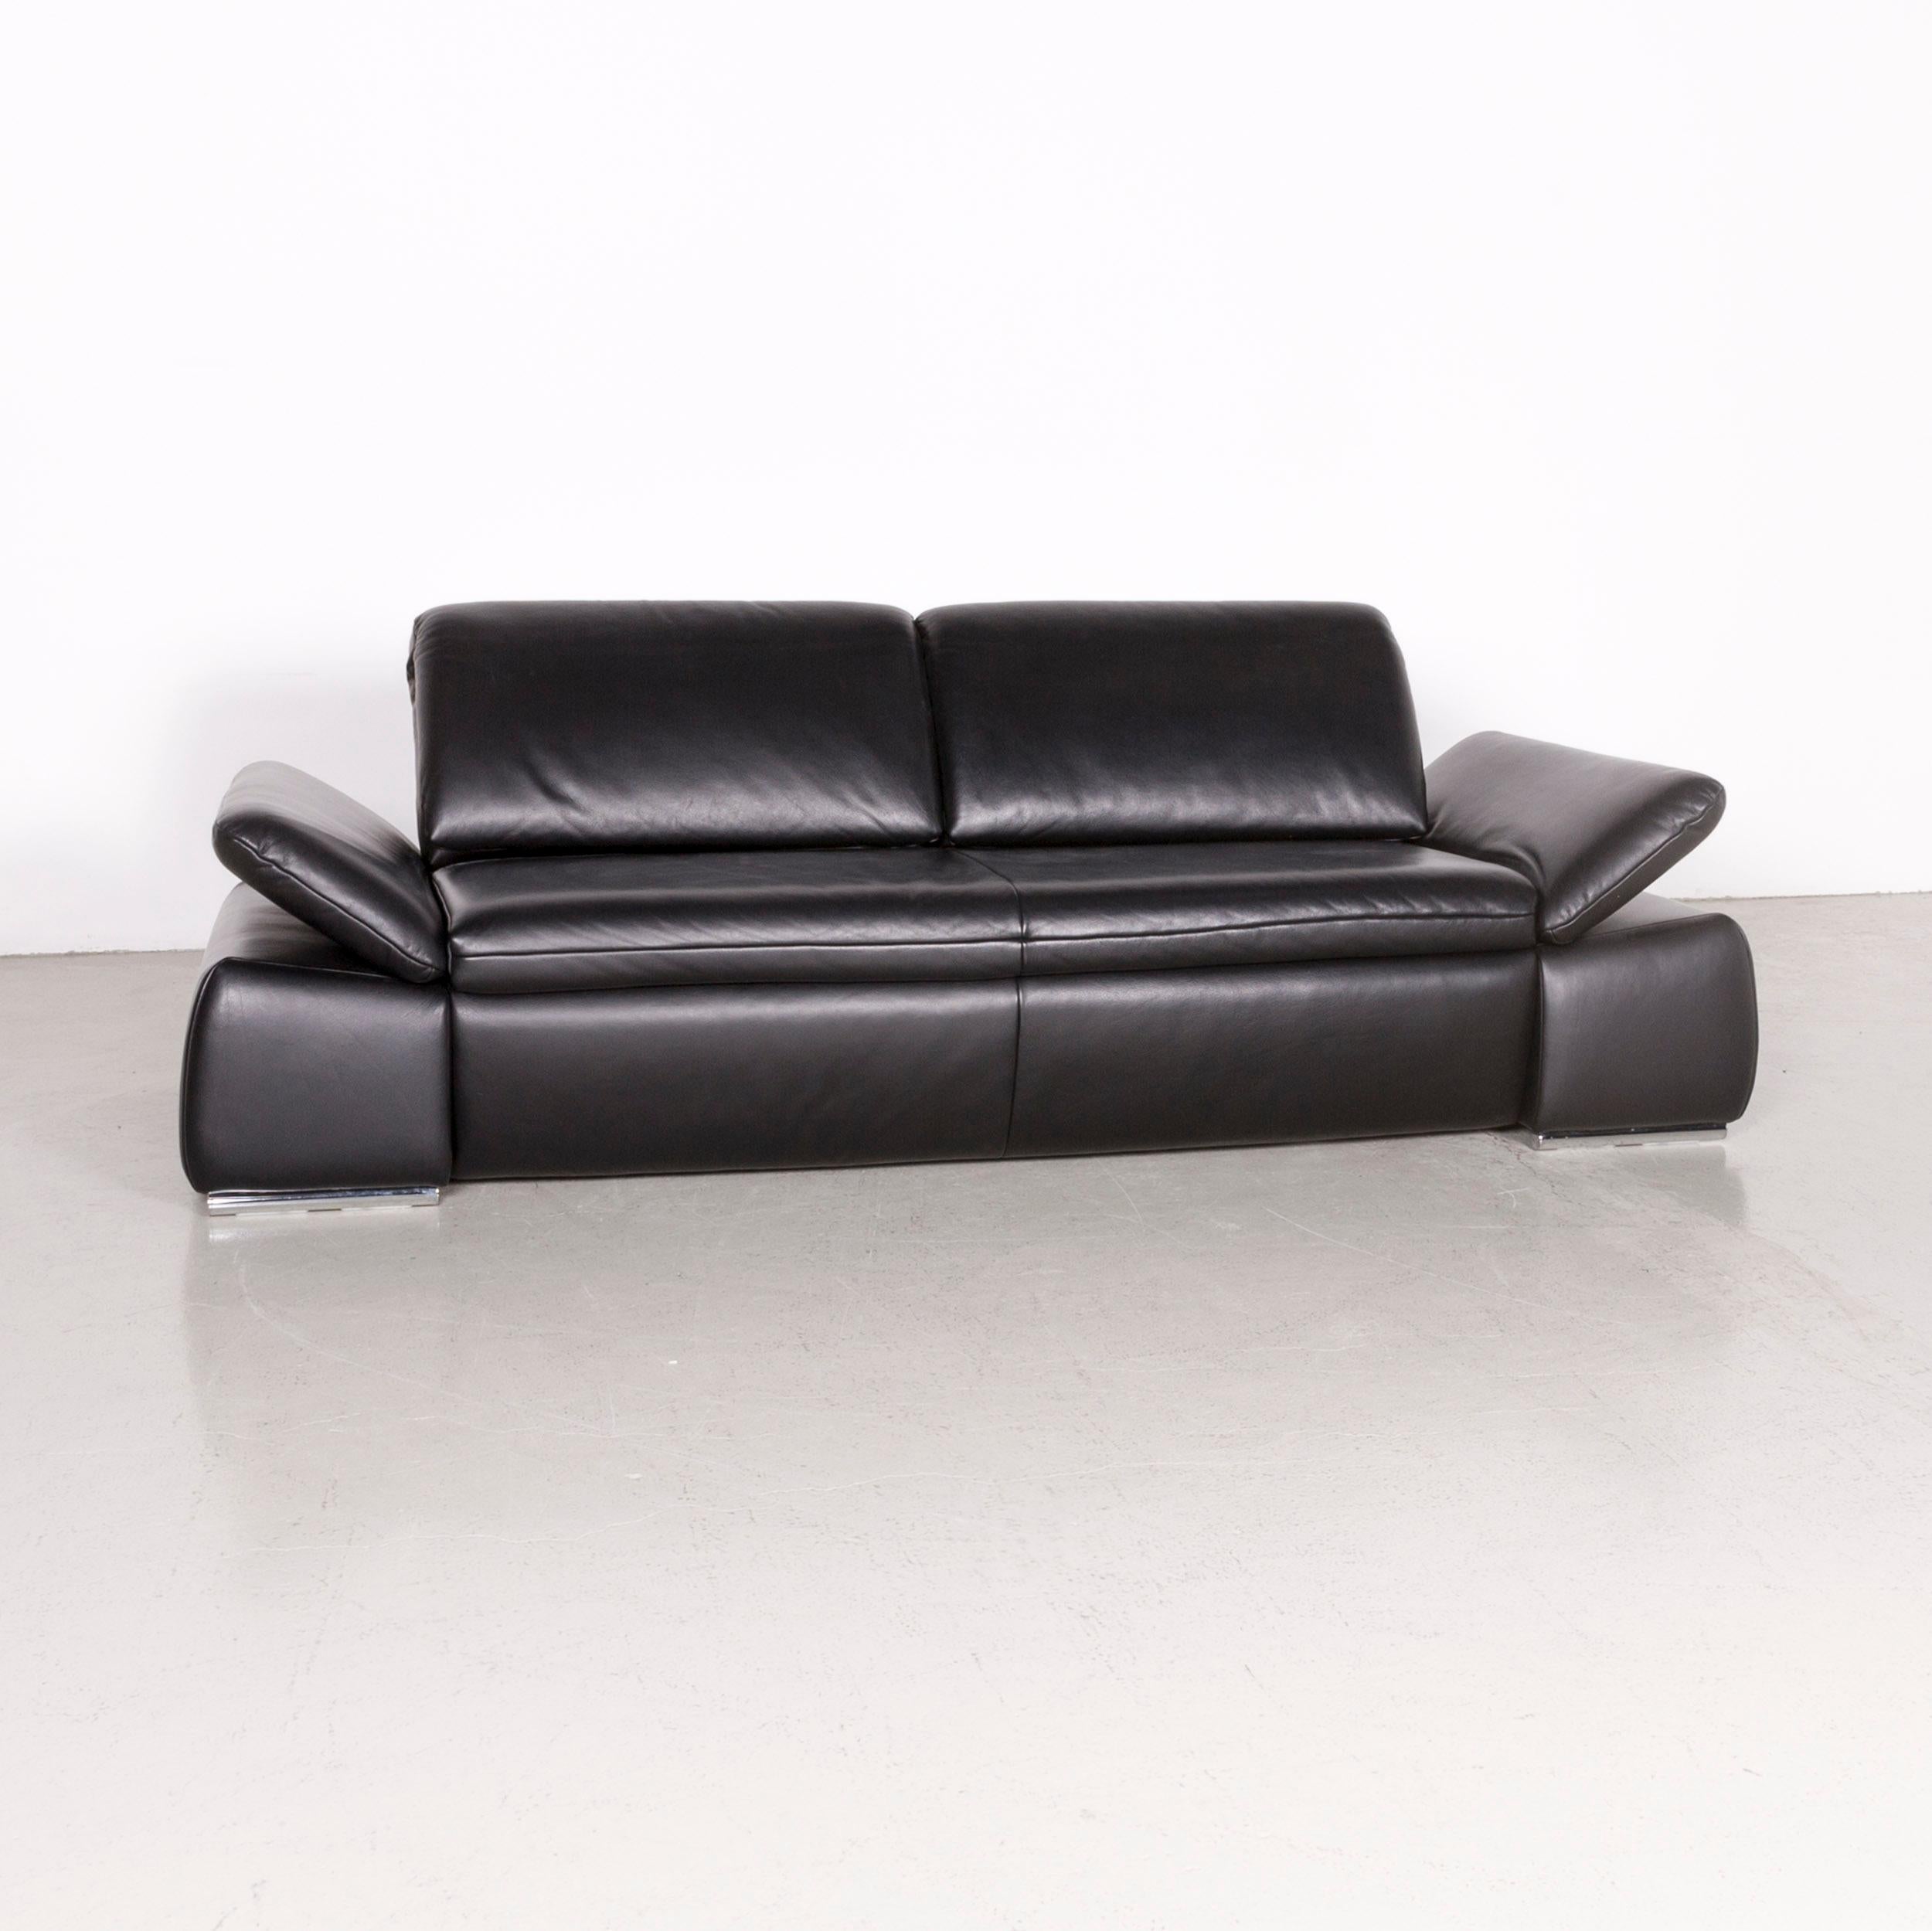 Koinor Evento Designer Sofa Black Three-Seat Leather Couch Electric Function For Sale 8